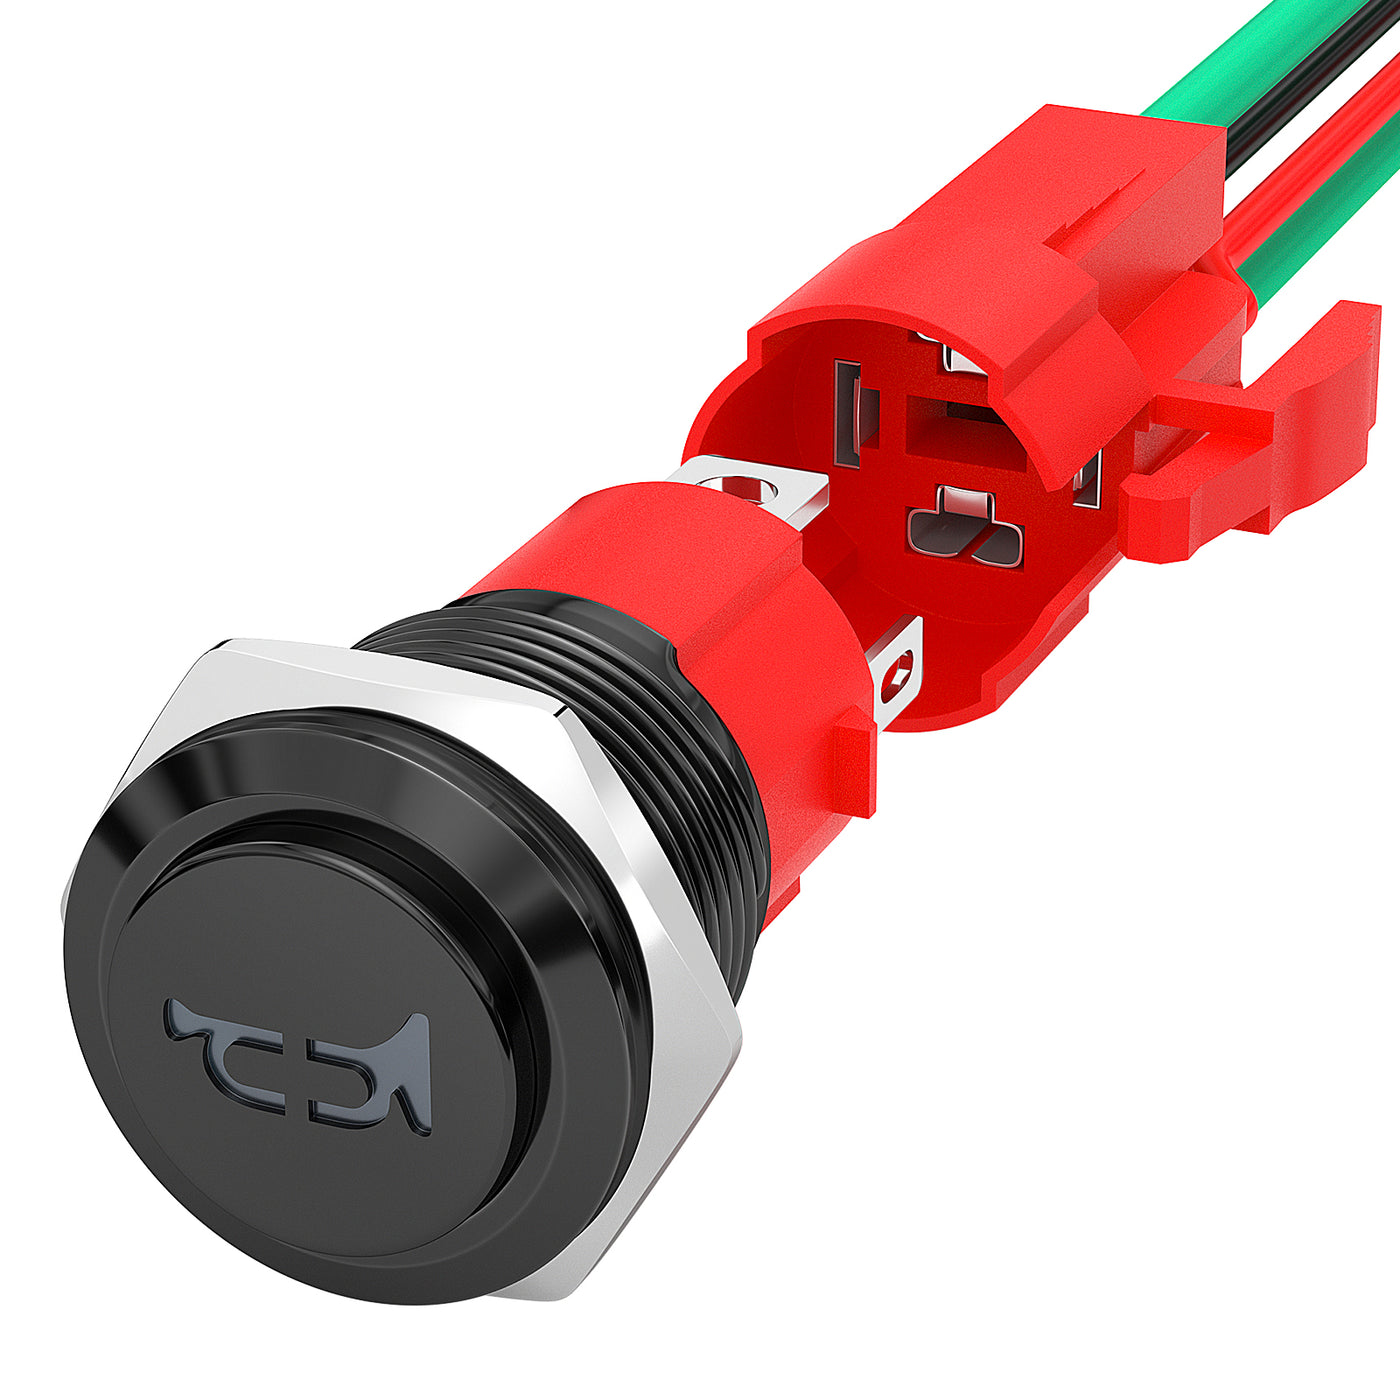 12V 20A Heavy Duty 16mm LED Illuminated Metal Horn Switch - DAIER